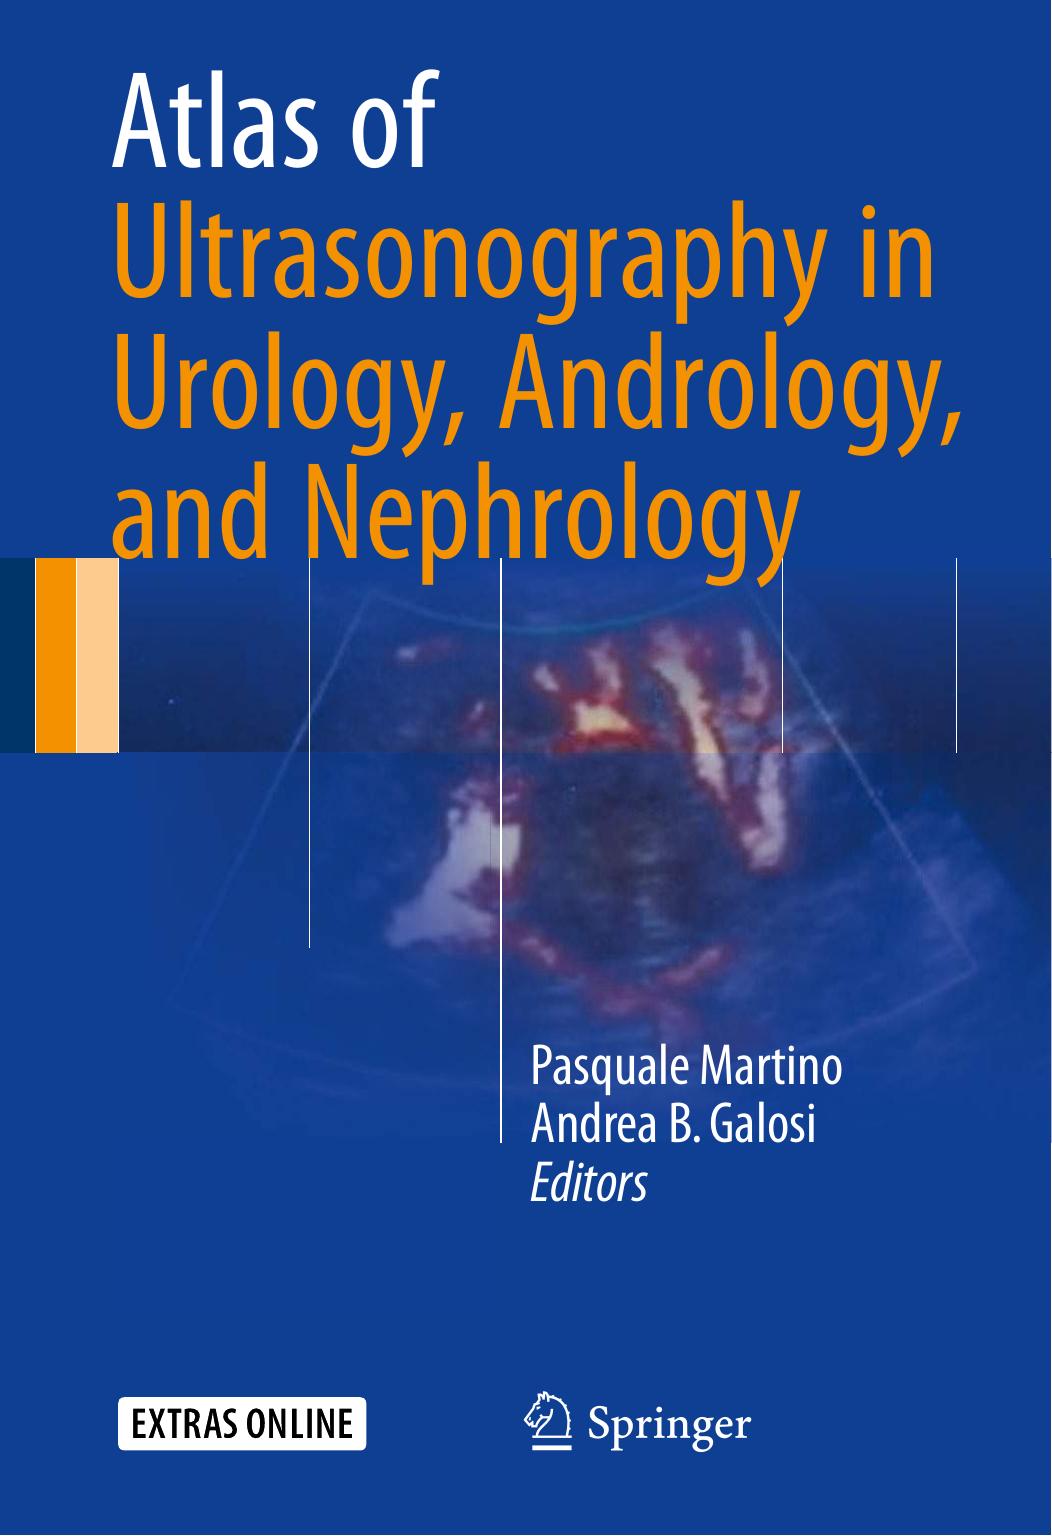 Atlas of Ultrasonography in Urology, Andrology, and Nephrology (April 25, 2017